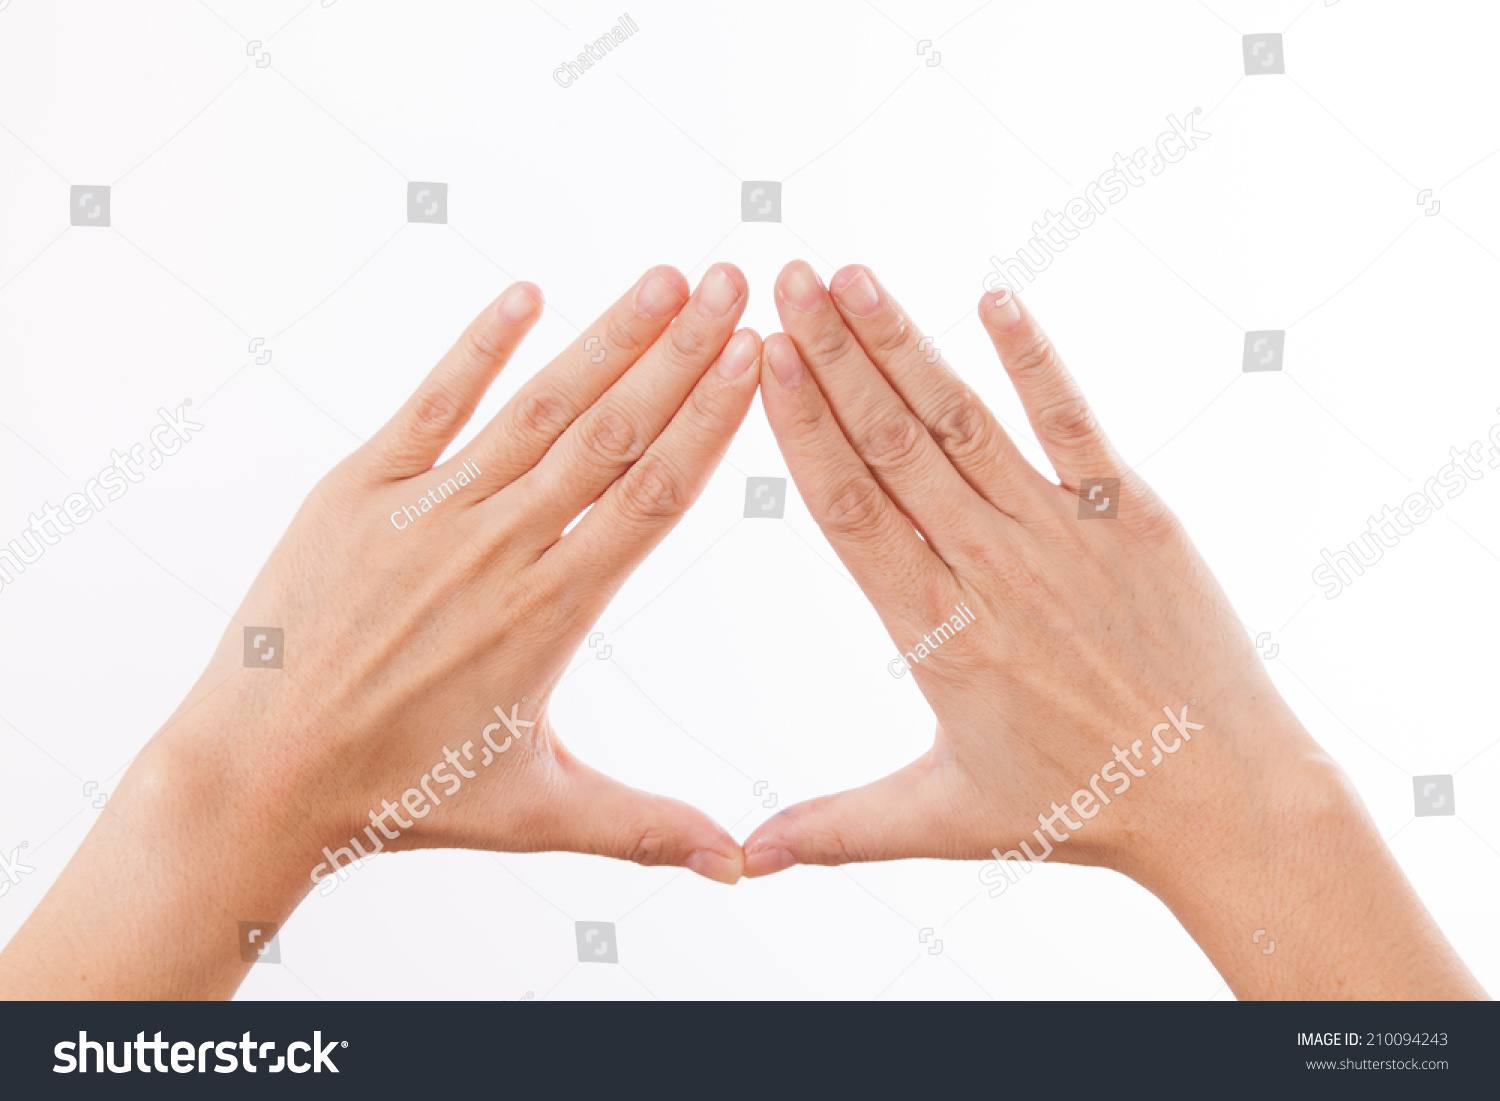 Triangle With Fingers Images Stock Photos Vectors Shutterstock